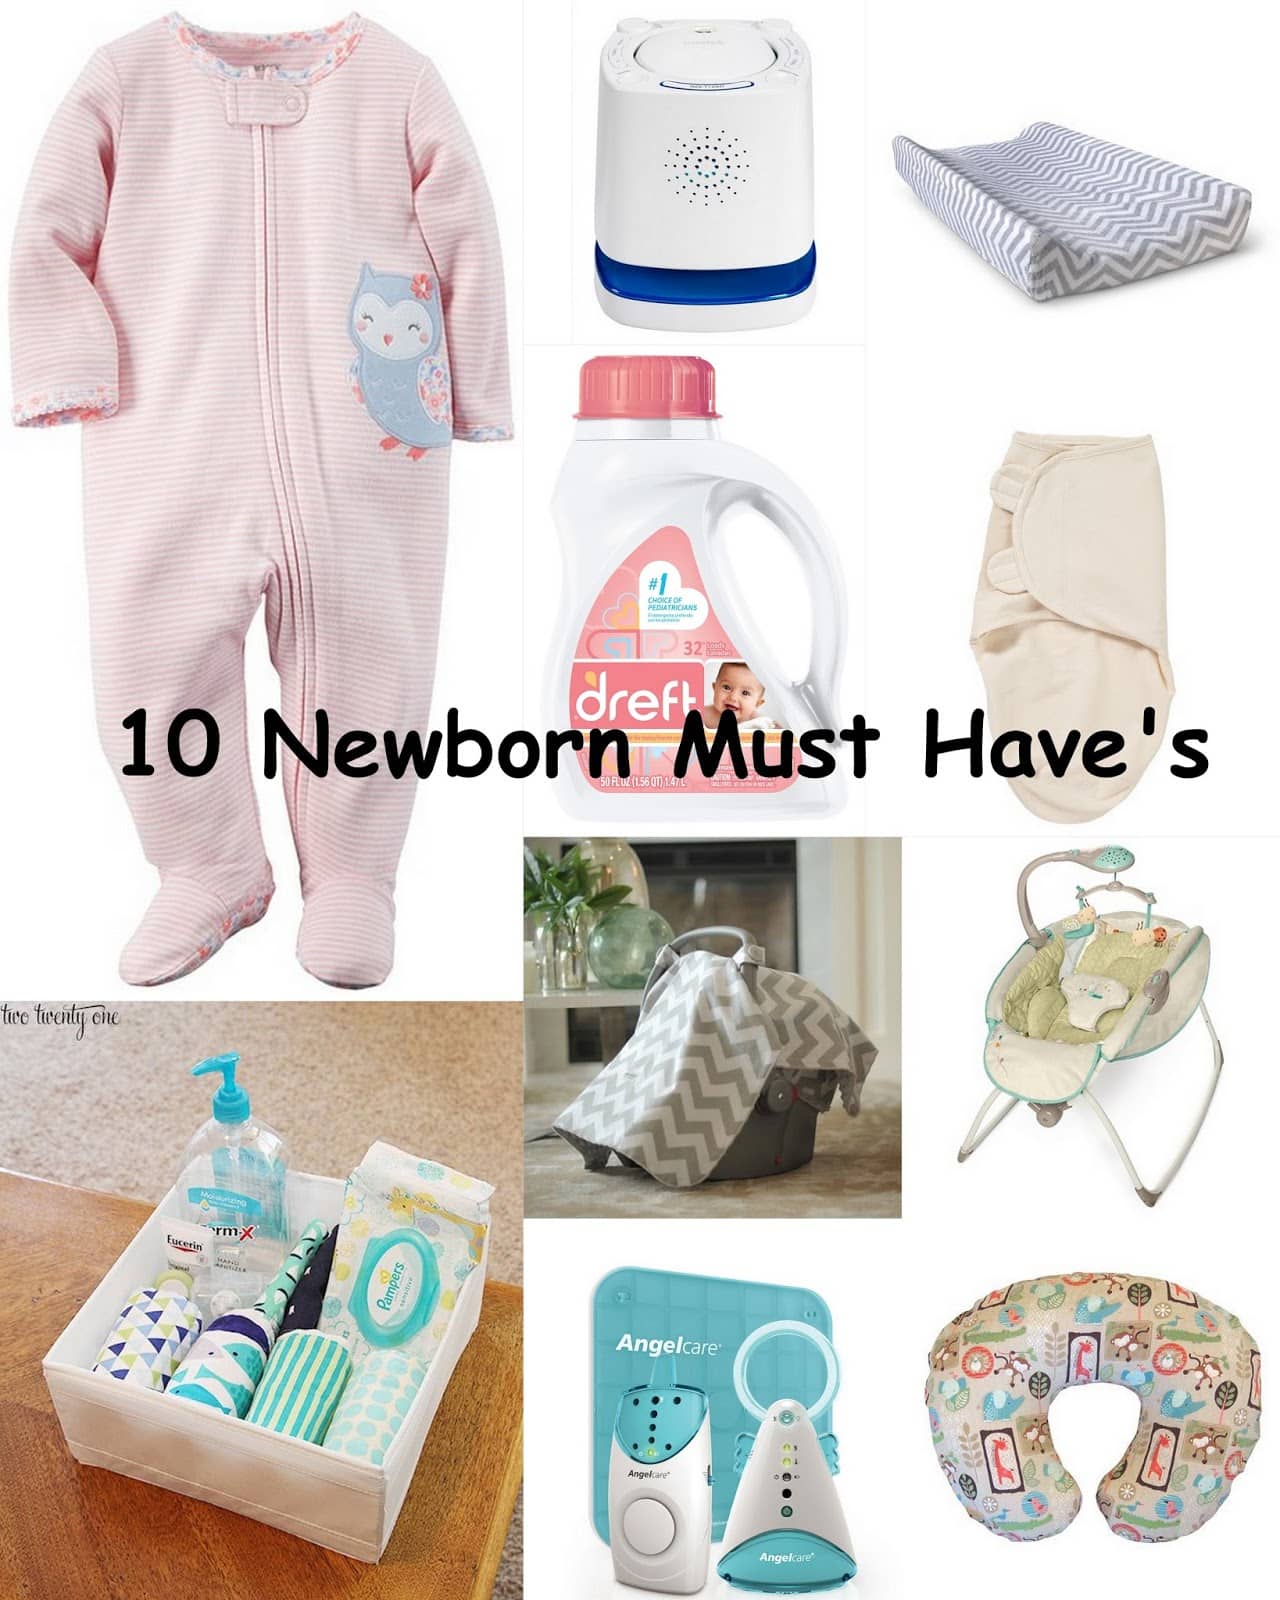 The Sweetest Nest : 10 newborn must haves!